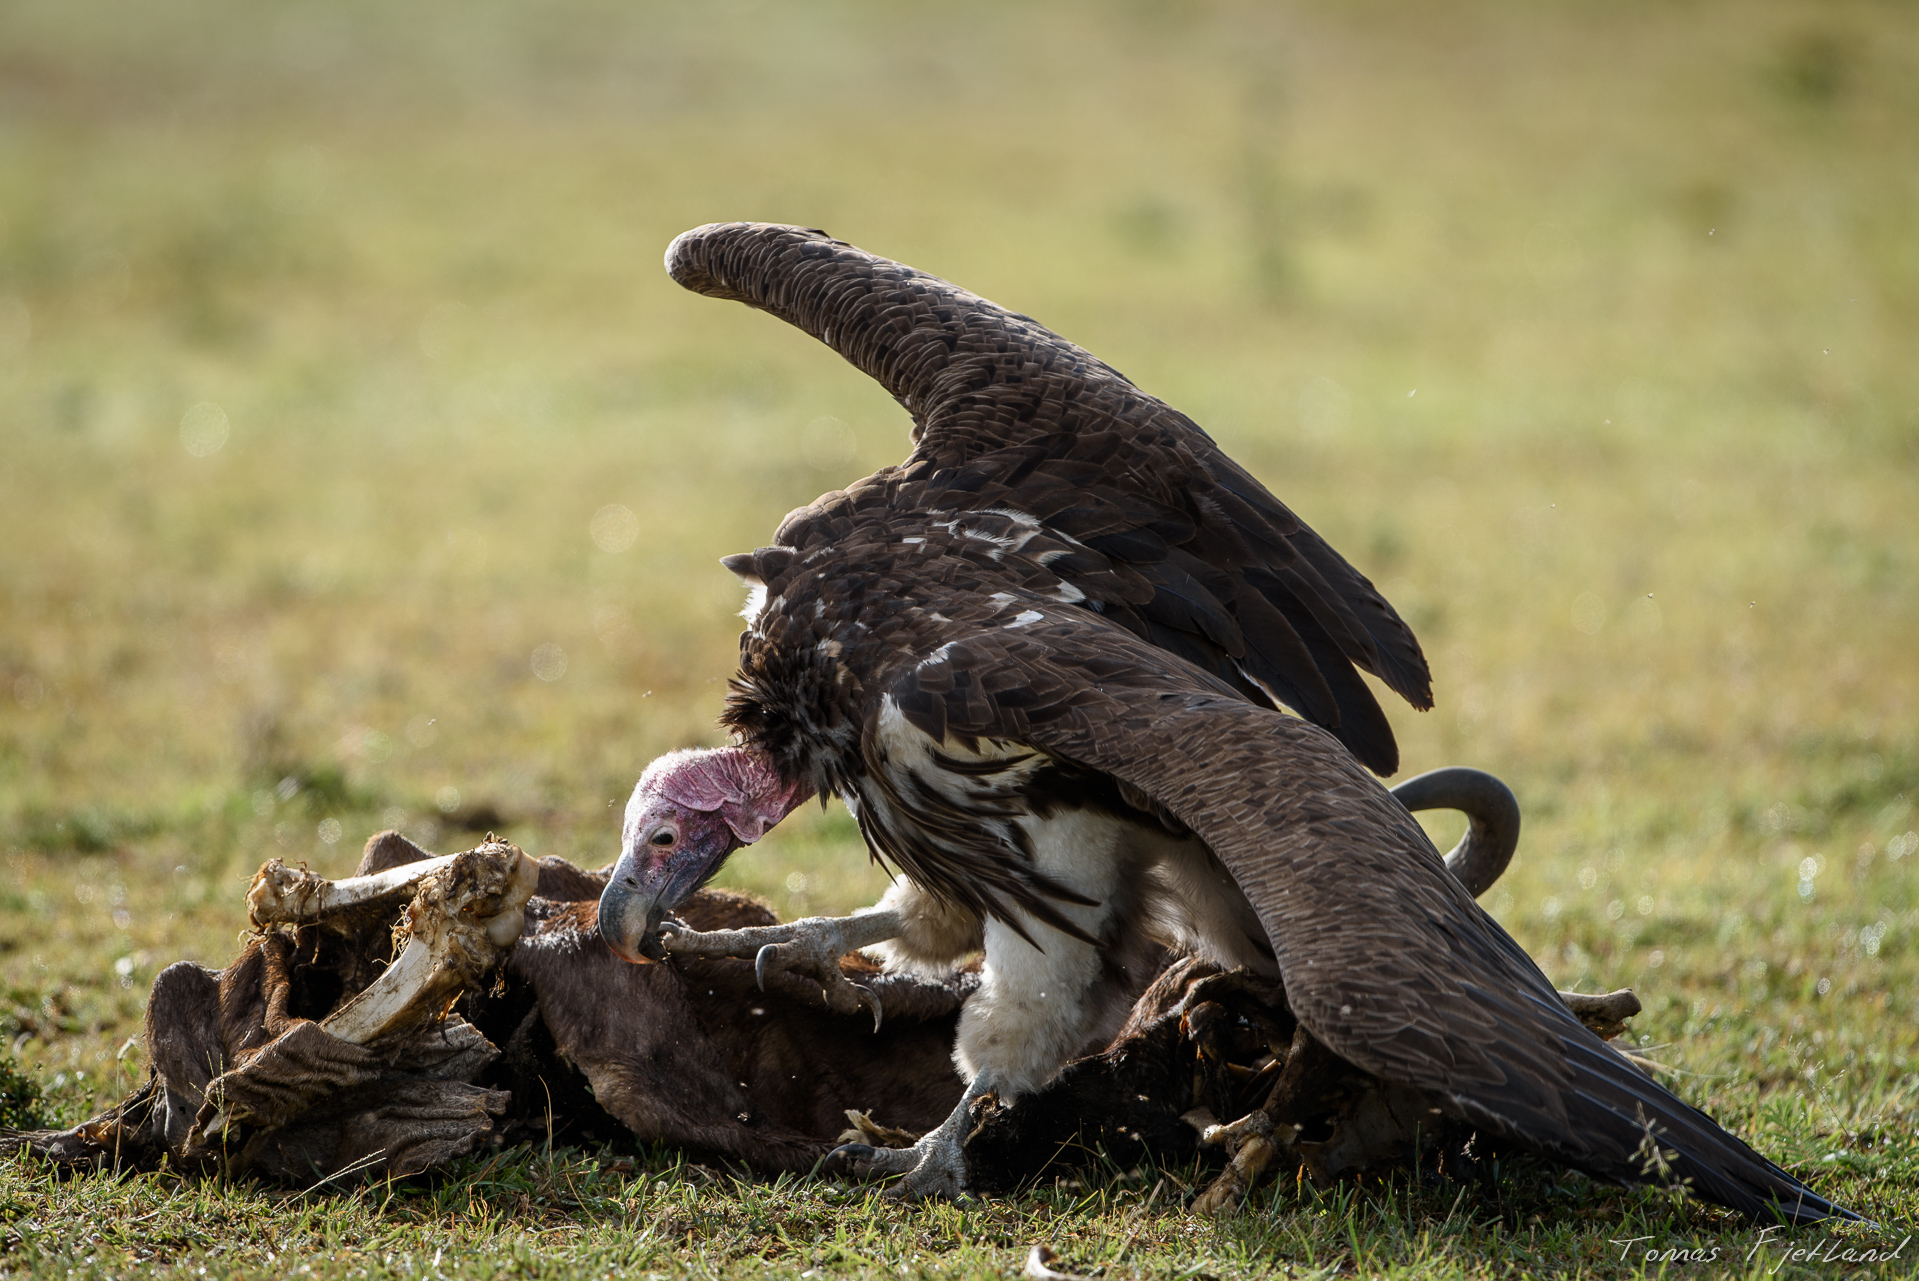 Lappet-faced vulture on an old wildebeest carcass